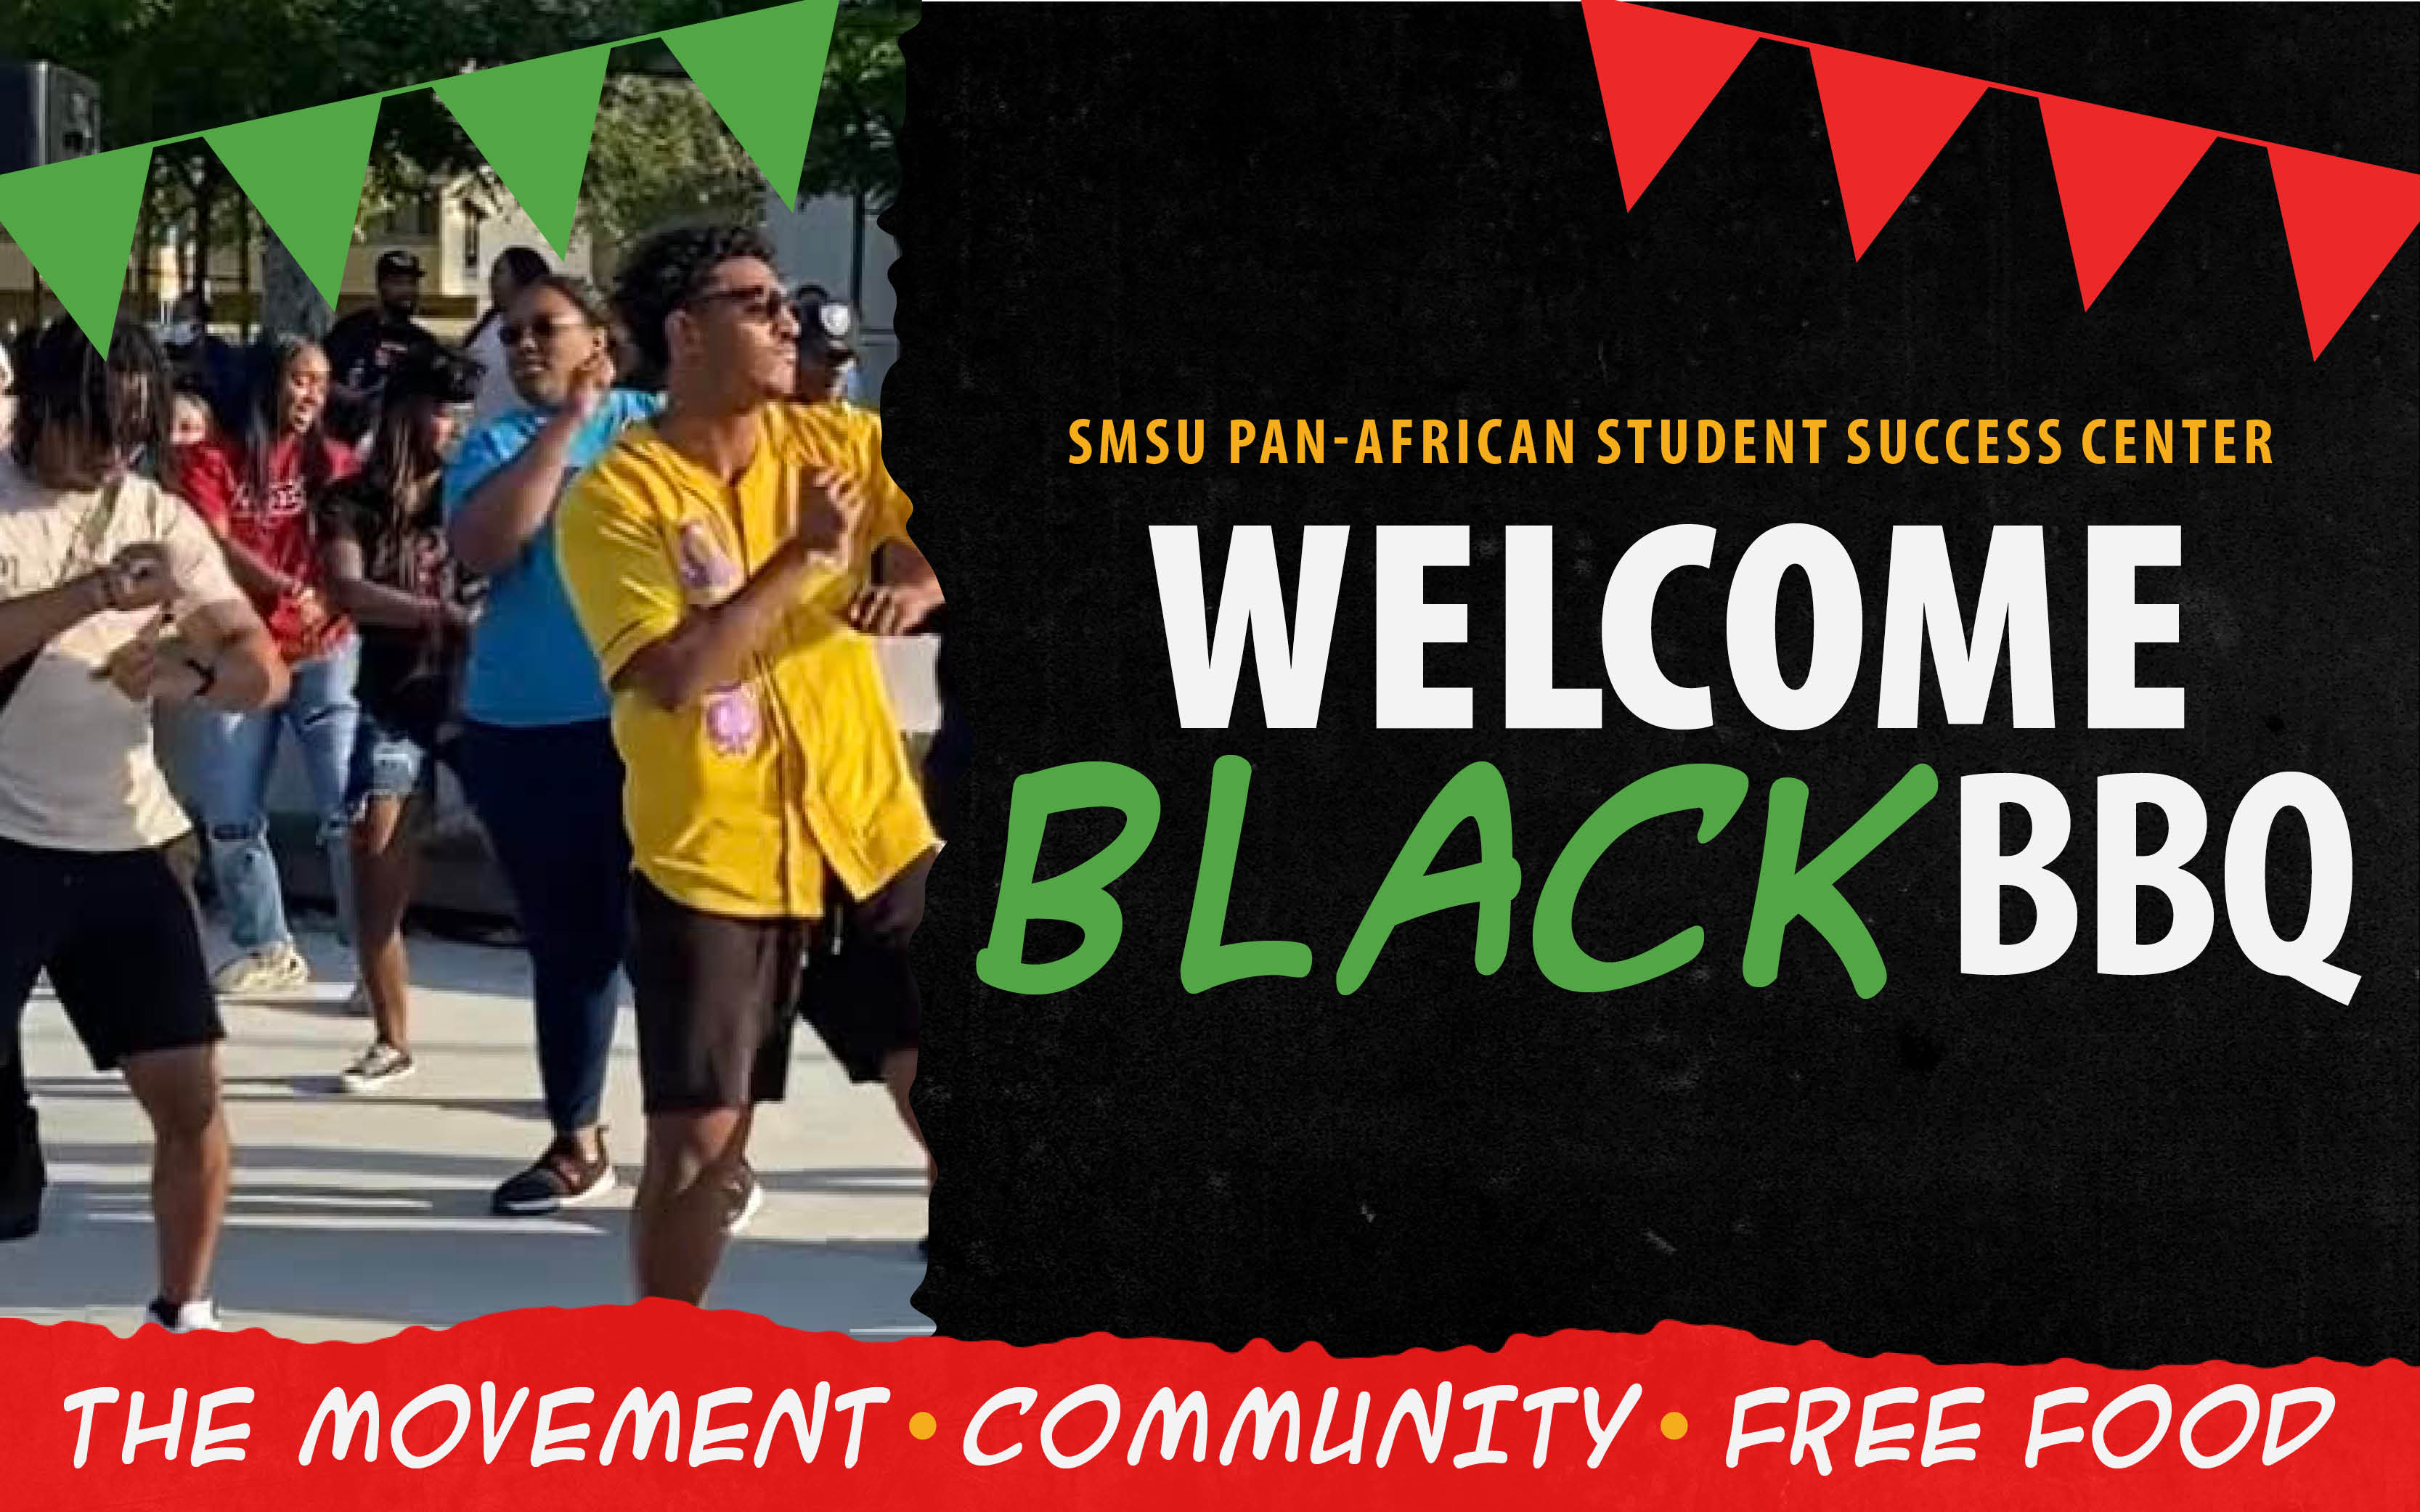 SMSU Pan-African Student Success Center, Welcome Black BBQ, The Movement, Community, Free Food